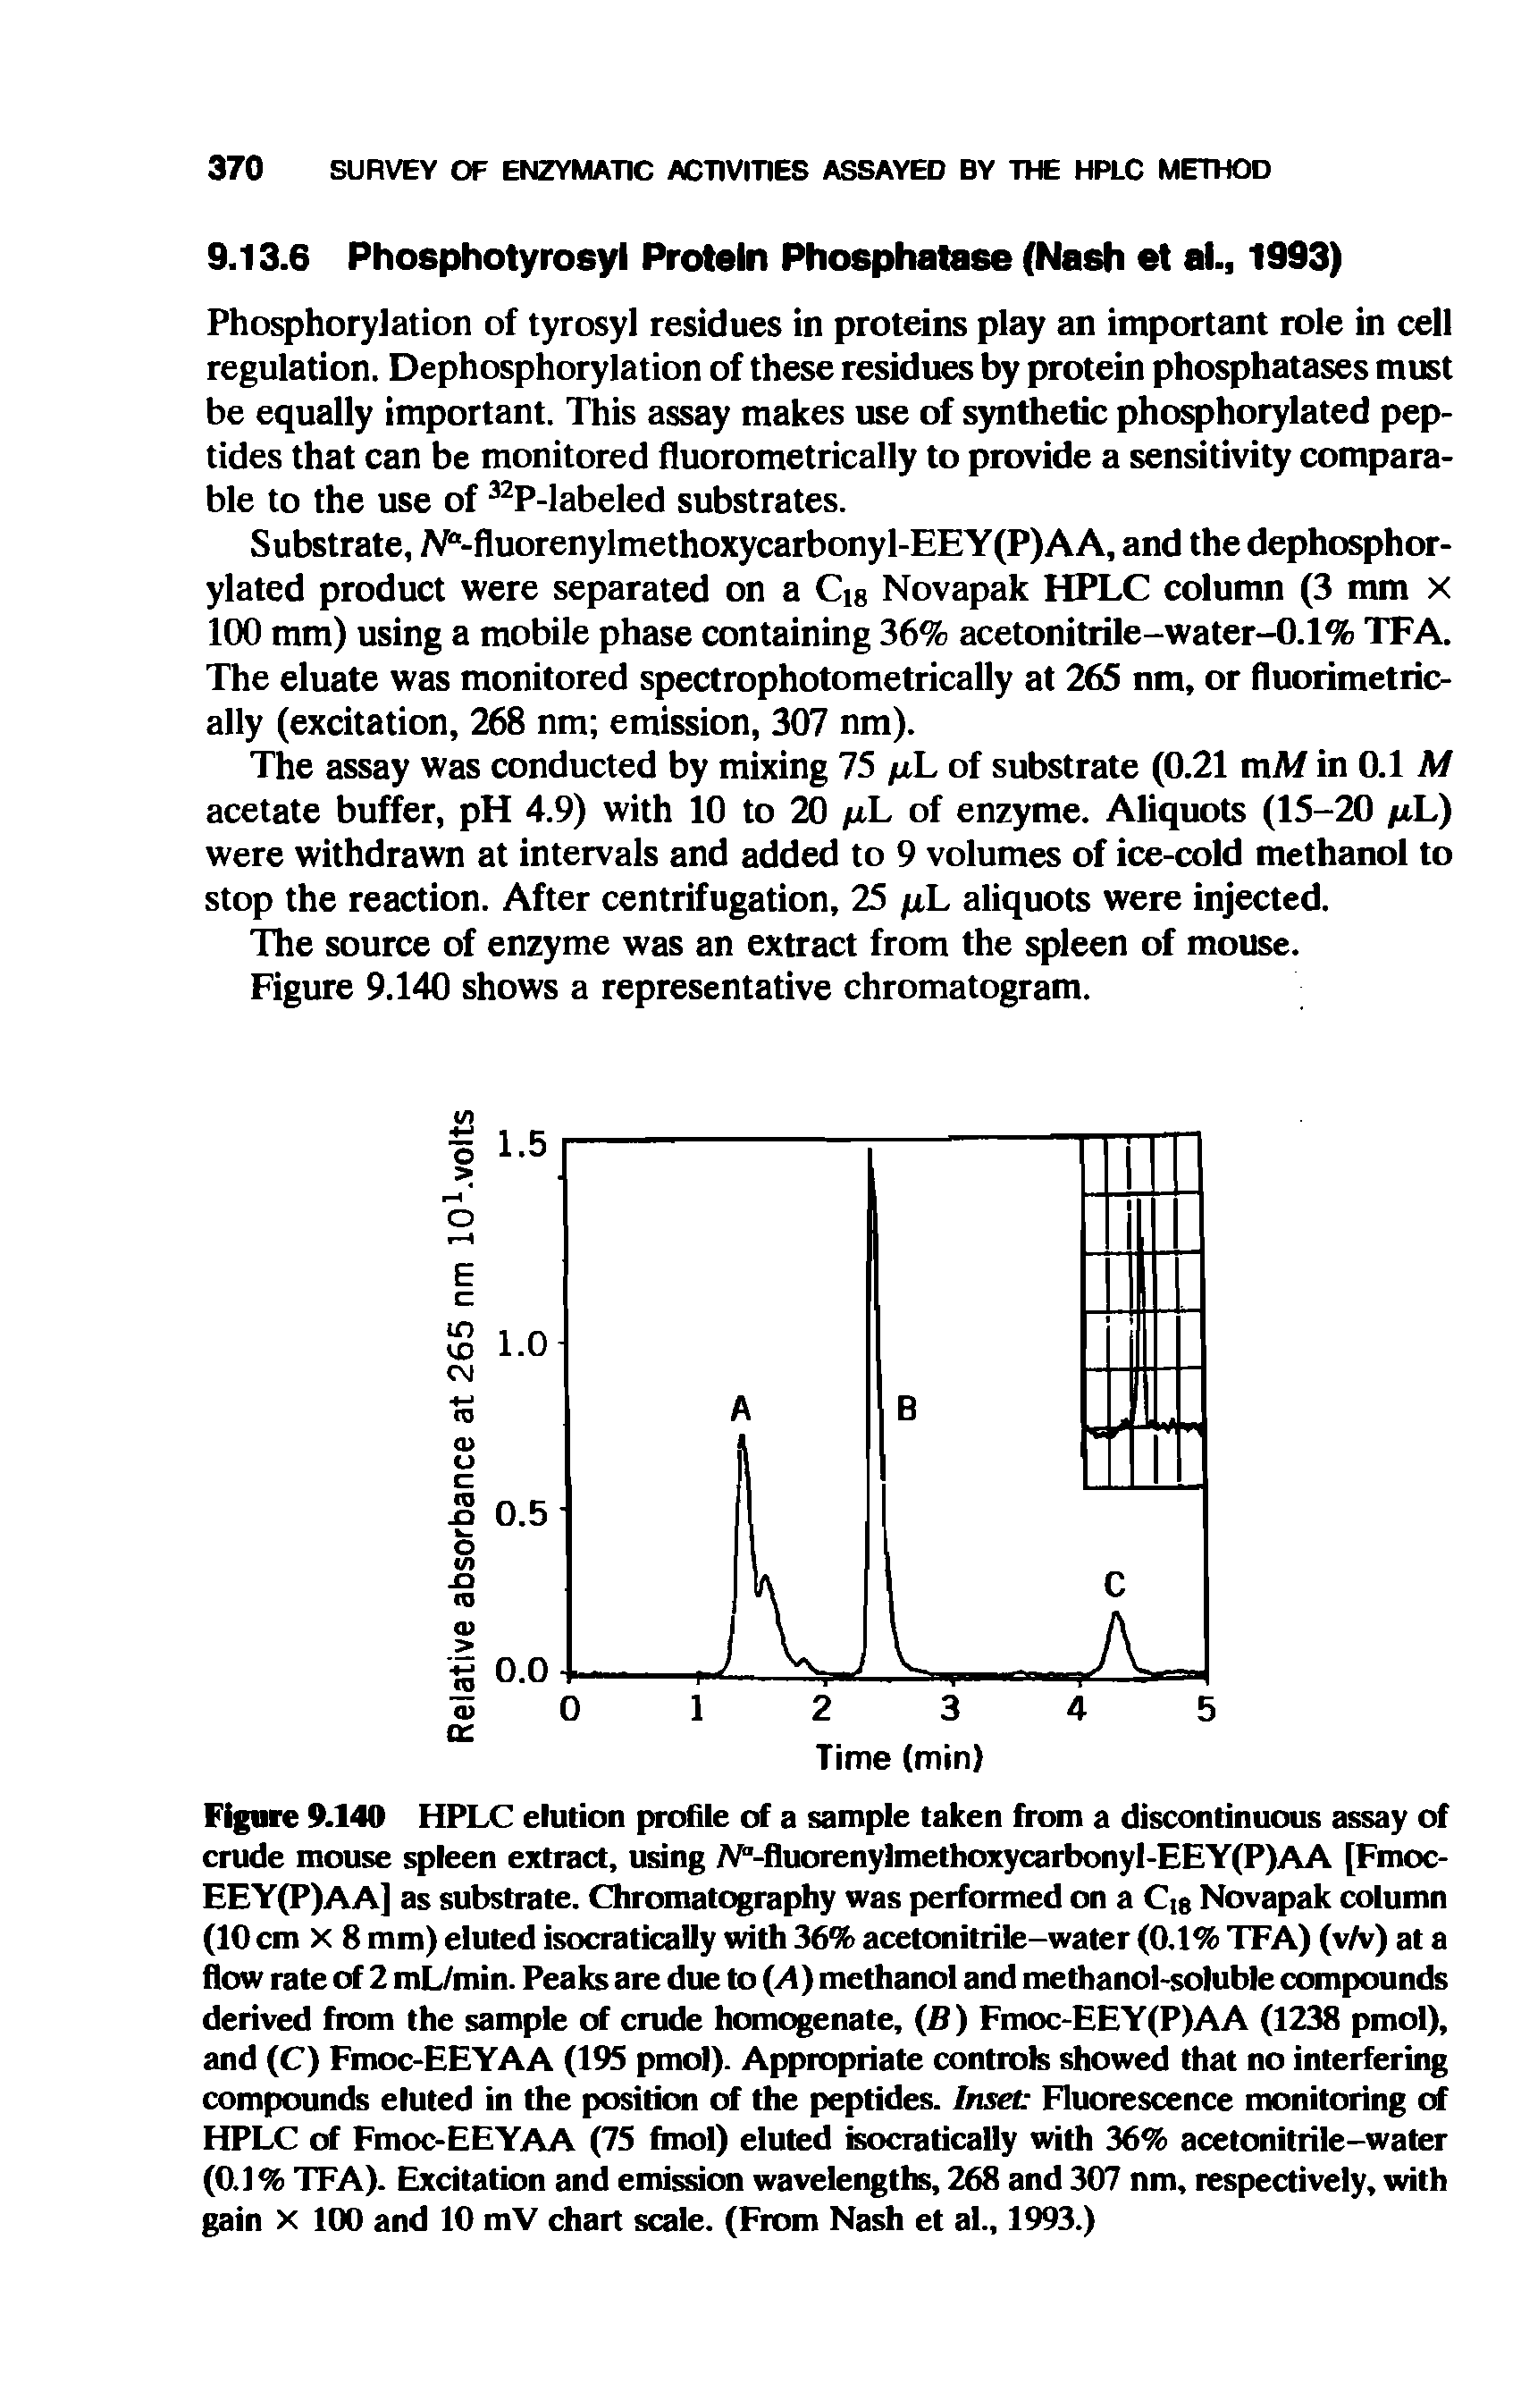 Figure 9.140 HPLC elution profile of a sample taken from a discontinuous assay of crude mouse spleen extract, using iV,-fluorenylmethoxycarbonyl-EEY(P)AA [Fmoc-EEY(P)AA] as substrate. Chromatography was performed on a C g Novapak column (10 cm X 8 mm) eluted isocratically with 36% acetonitrile-water (0.1% TFA) (v/v) at a flow rate of 2 mL/min. Peaks are due to (A) methanol and methanol-soluble compounds derived from the sample of crude homogenate, (B) Fmoc-EEY(P)AA (1238 pmol), and (C) Fmoc-EEYAA (195 pmol). Appropriate controls showed that no interfering compounds eluted in the position of the peptides. Inset Fluorescence monitoring of HPLC of Fmoc-EEYAA (75 fmol) eluted isocratically with 36% acetonitrile-water (0.1% TFA). Excitation and emission wavelengths, 268 and 307 nm, respectively, with gain X 100 and 10 mV chart scale. (From Nash et al., 1993.)...